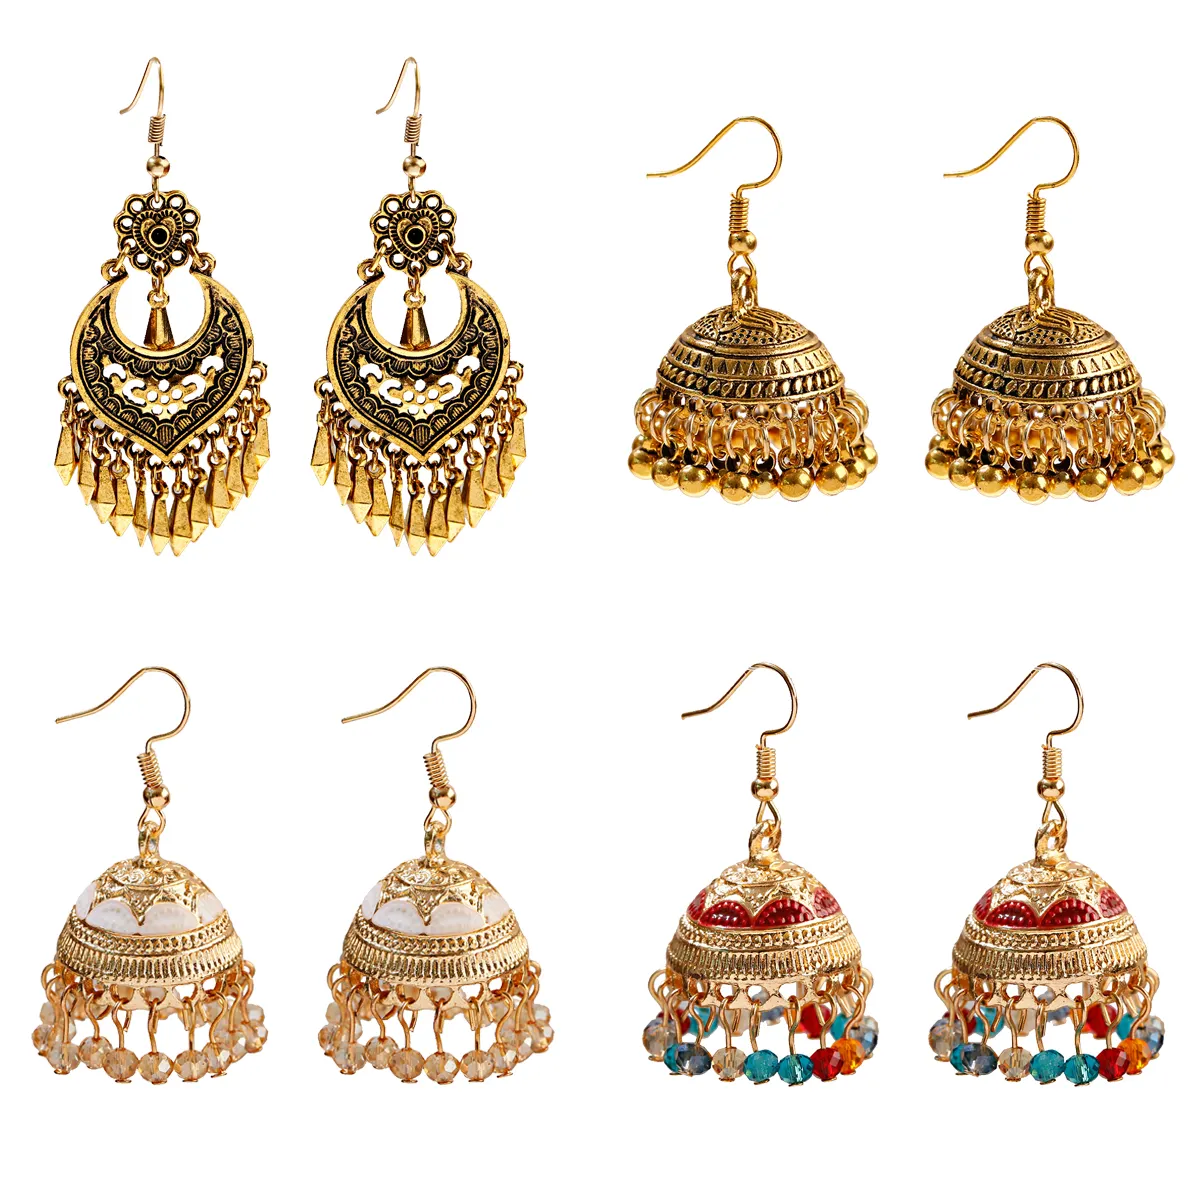 Douvei New Design Earrings Cubic Zirconia Jewelry Paved Gold Plated Crystal Round Bead Tassel Bell Dangle Earrings